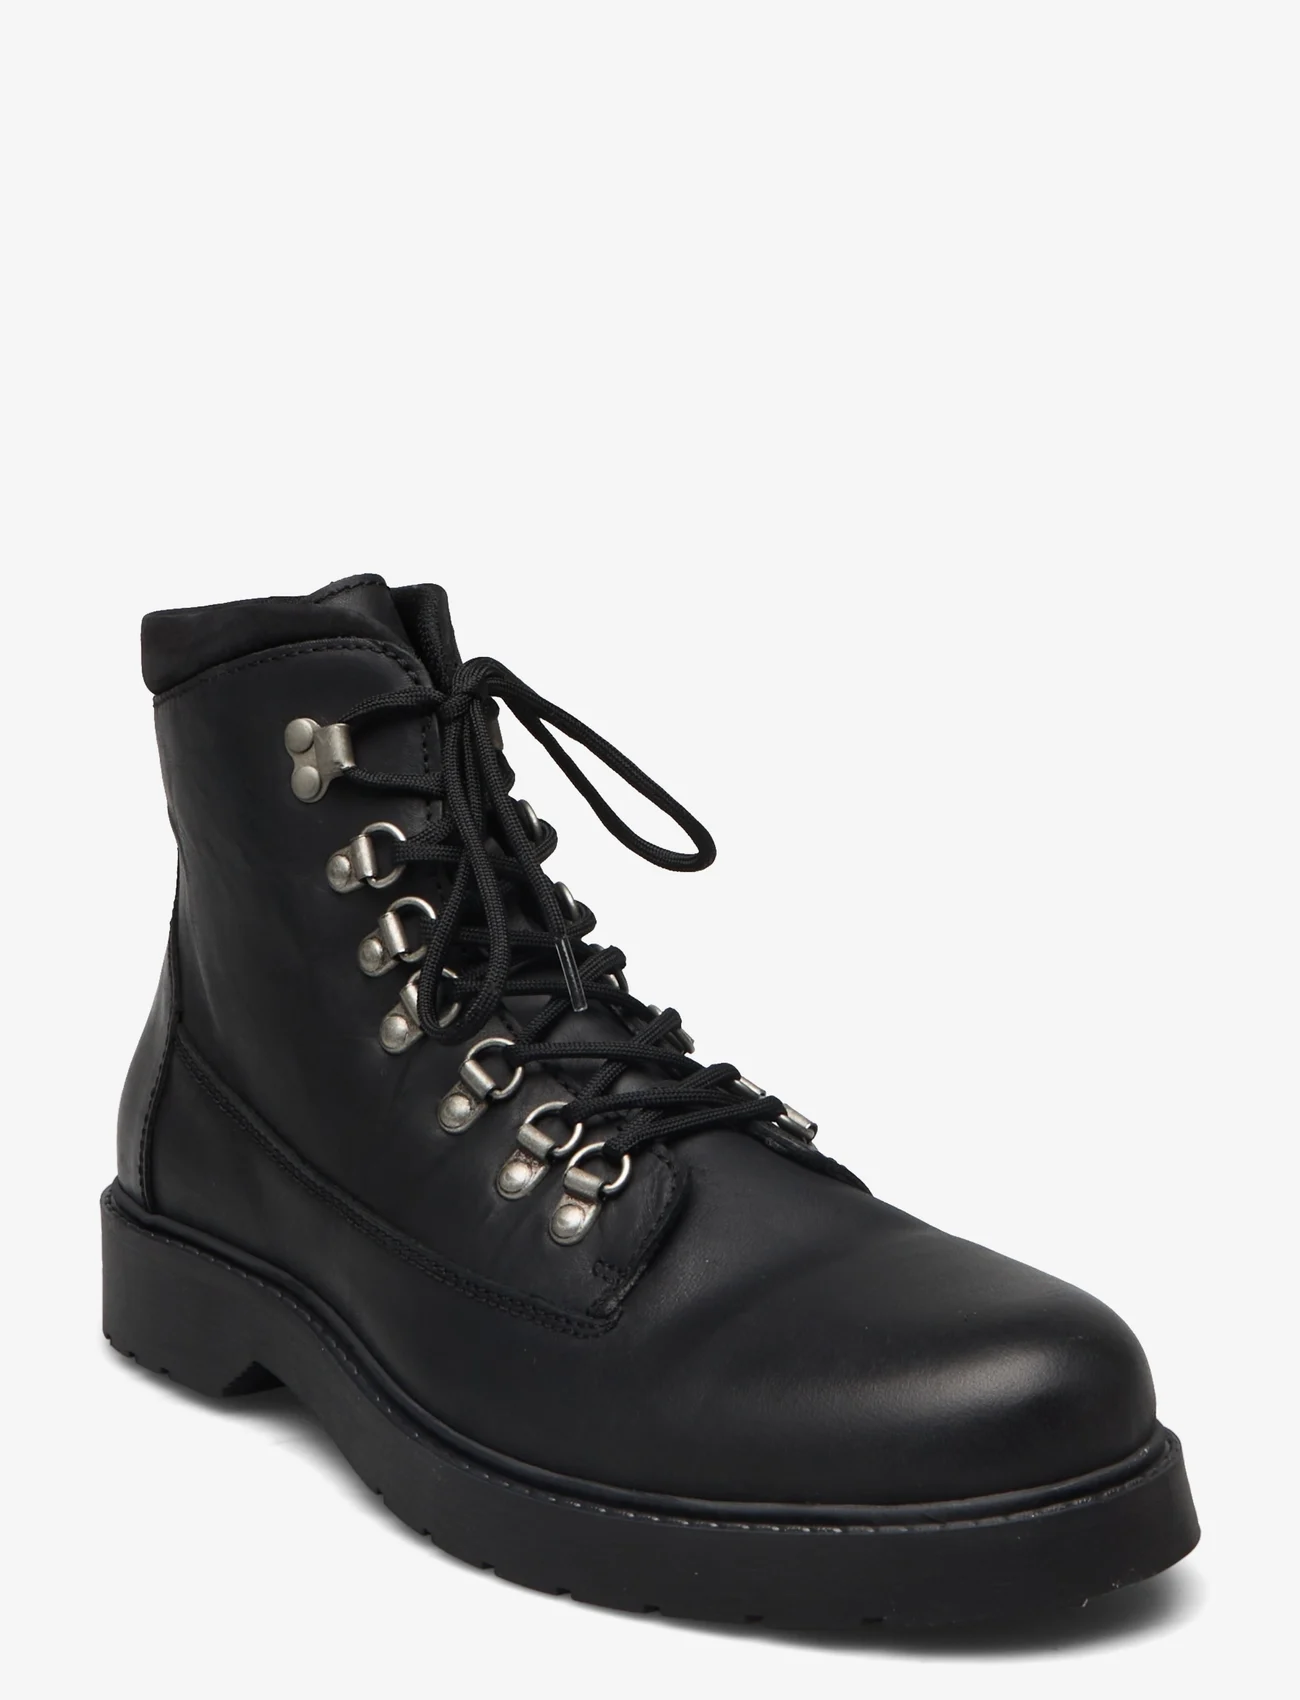 Selected Homme - SLHMADS LEATHER BOOT B NOOS - nauhalliset - black - 0